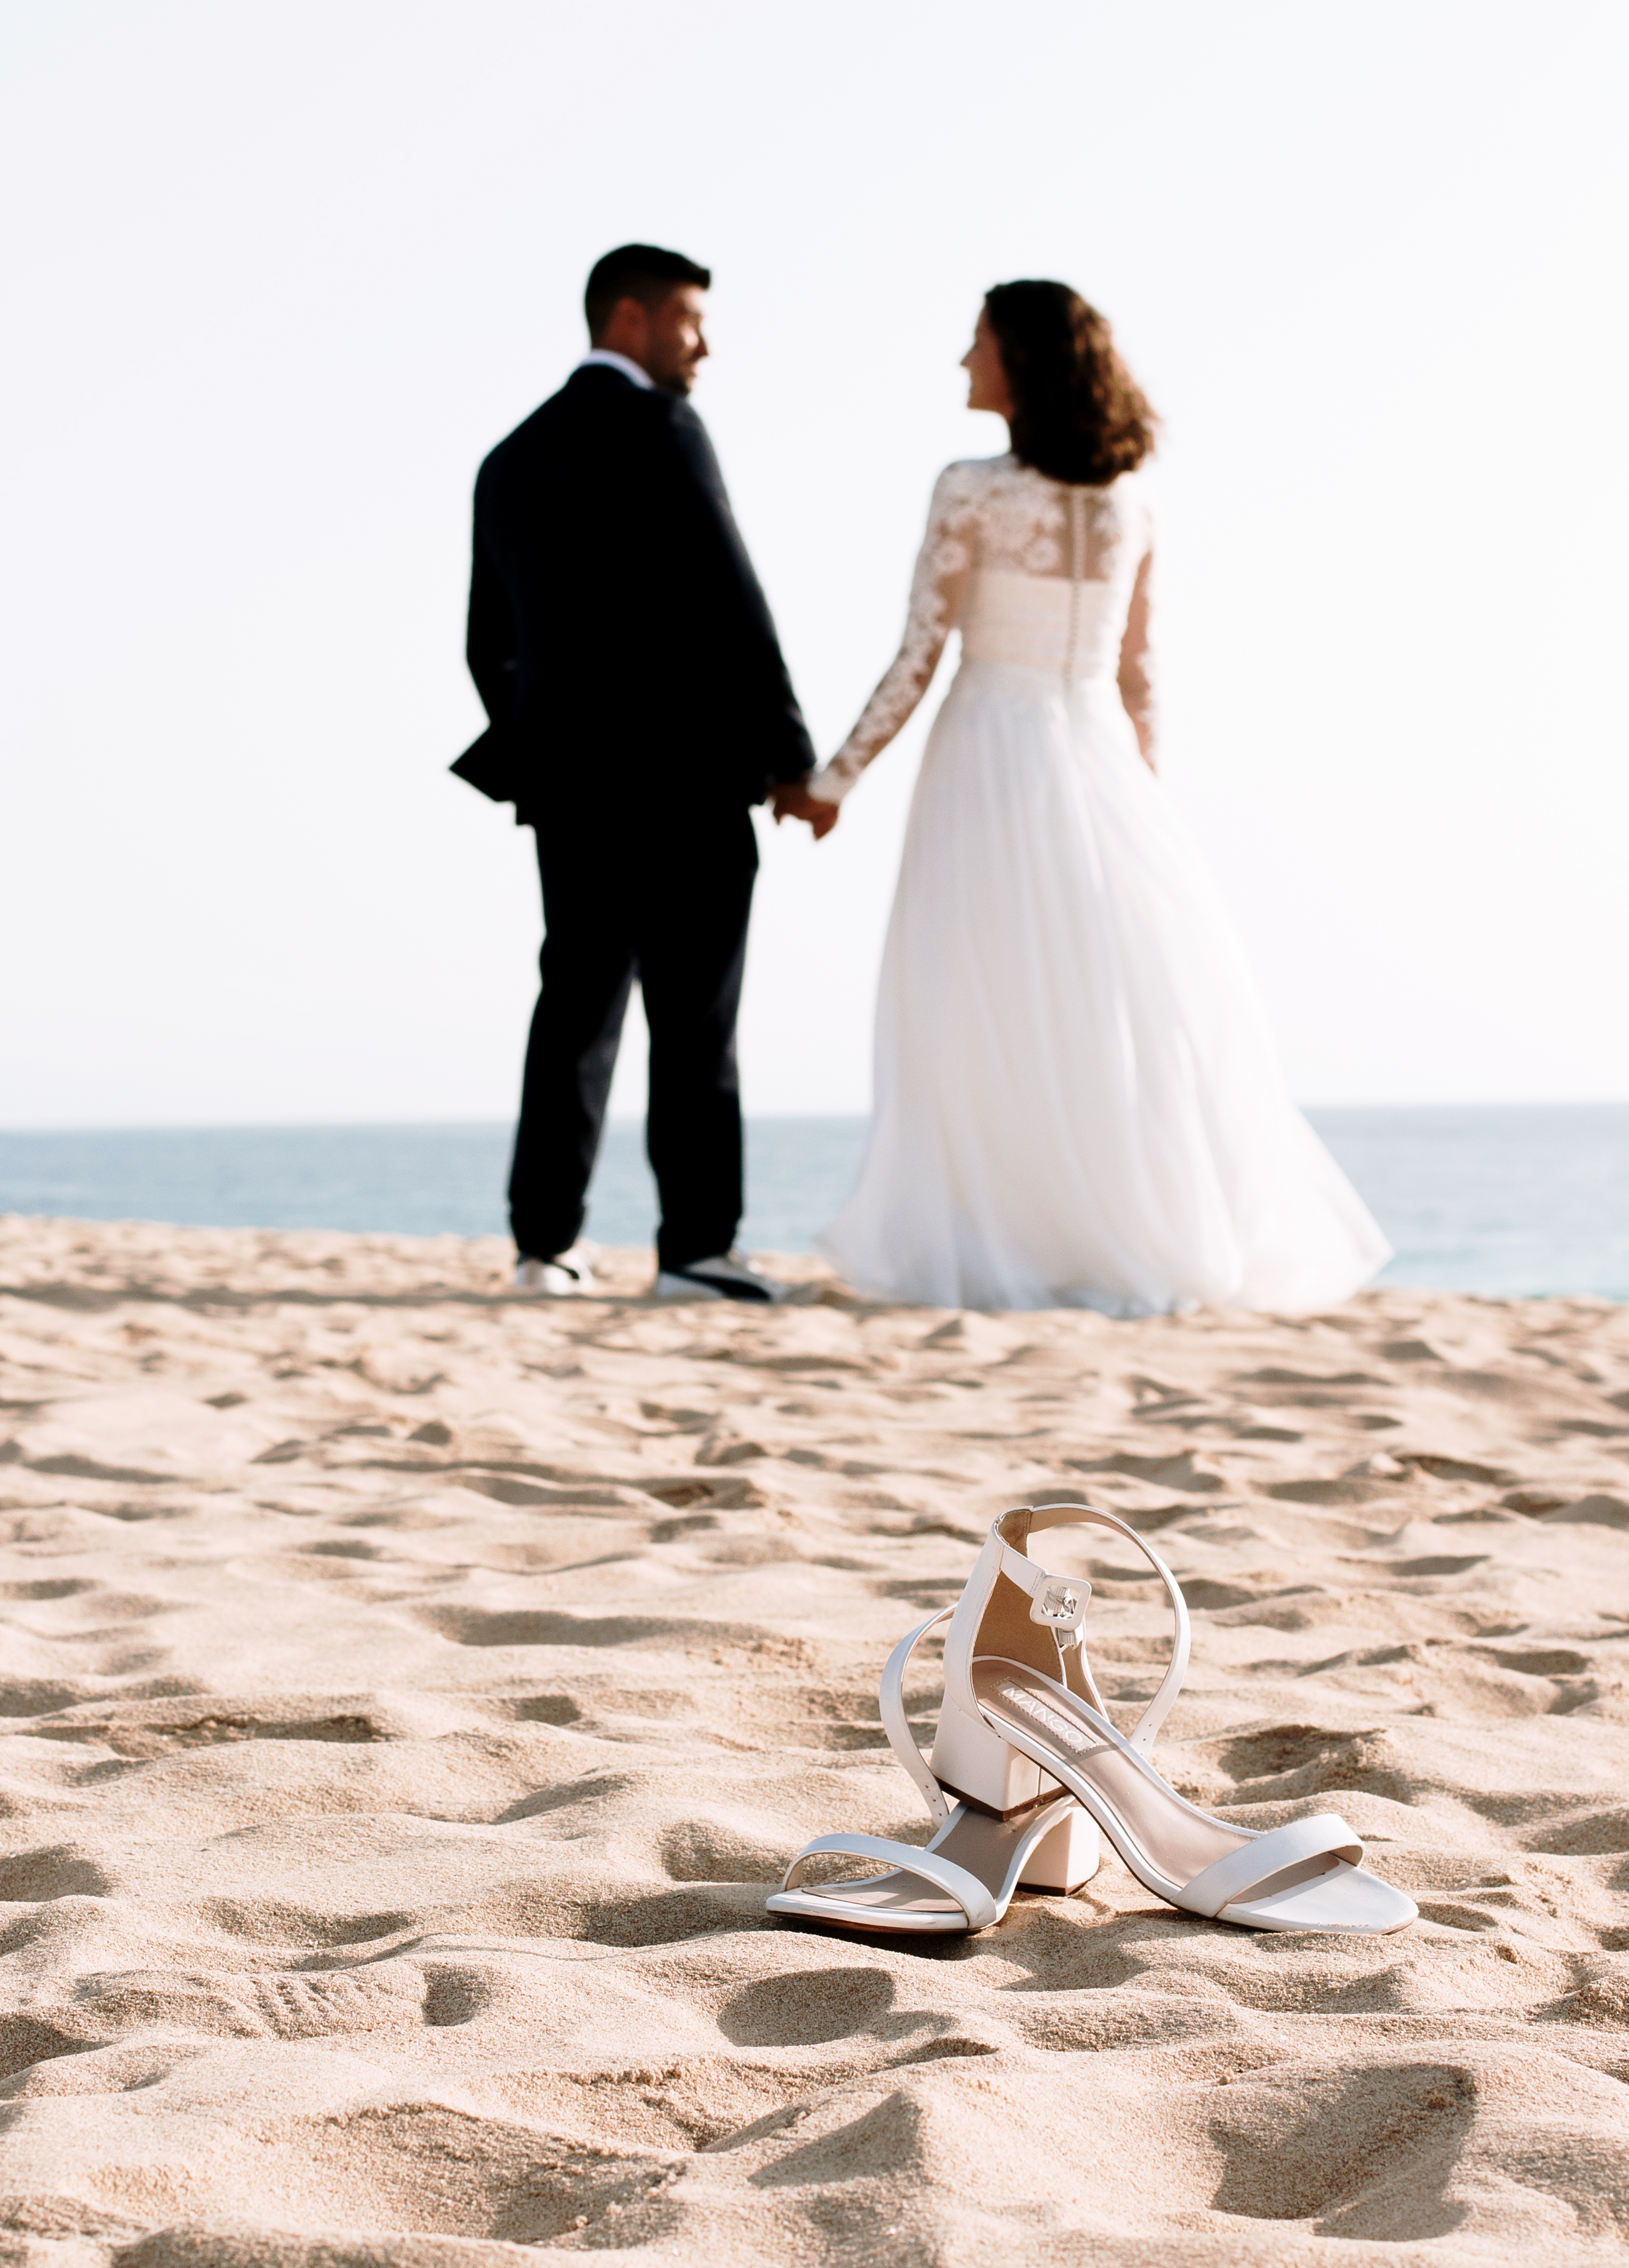 Bride's shoes are in the focus at the beach, couple stands more far away from shoes and they are blurry